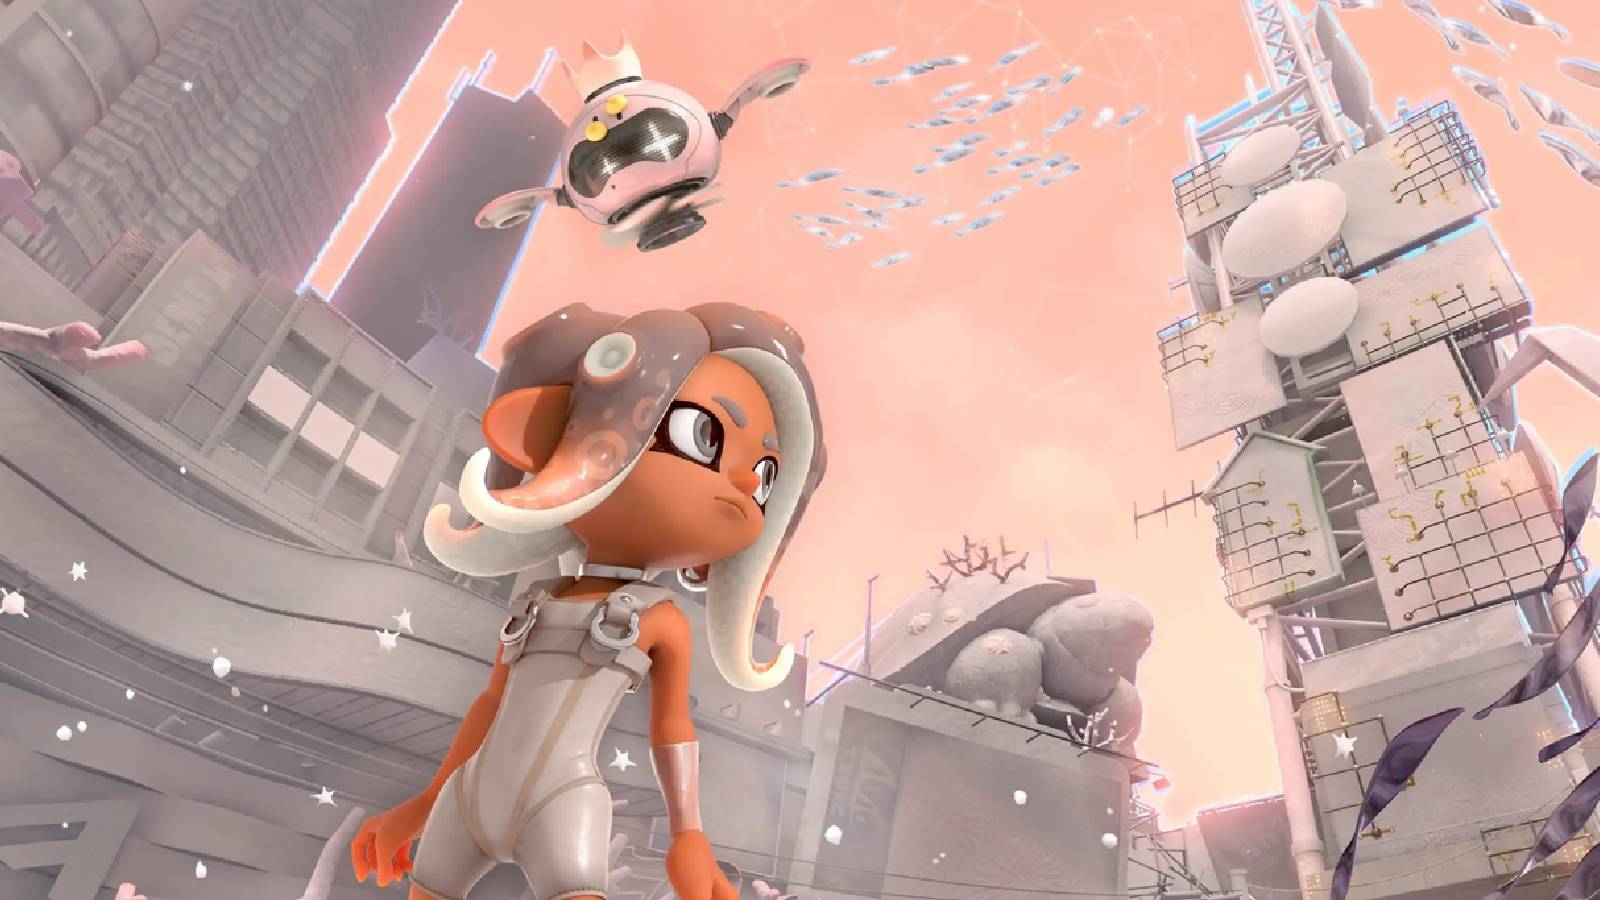 Splatoon 3 key art shows Agent 8 and the Pearl drone stood in front of The Spire